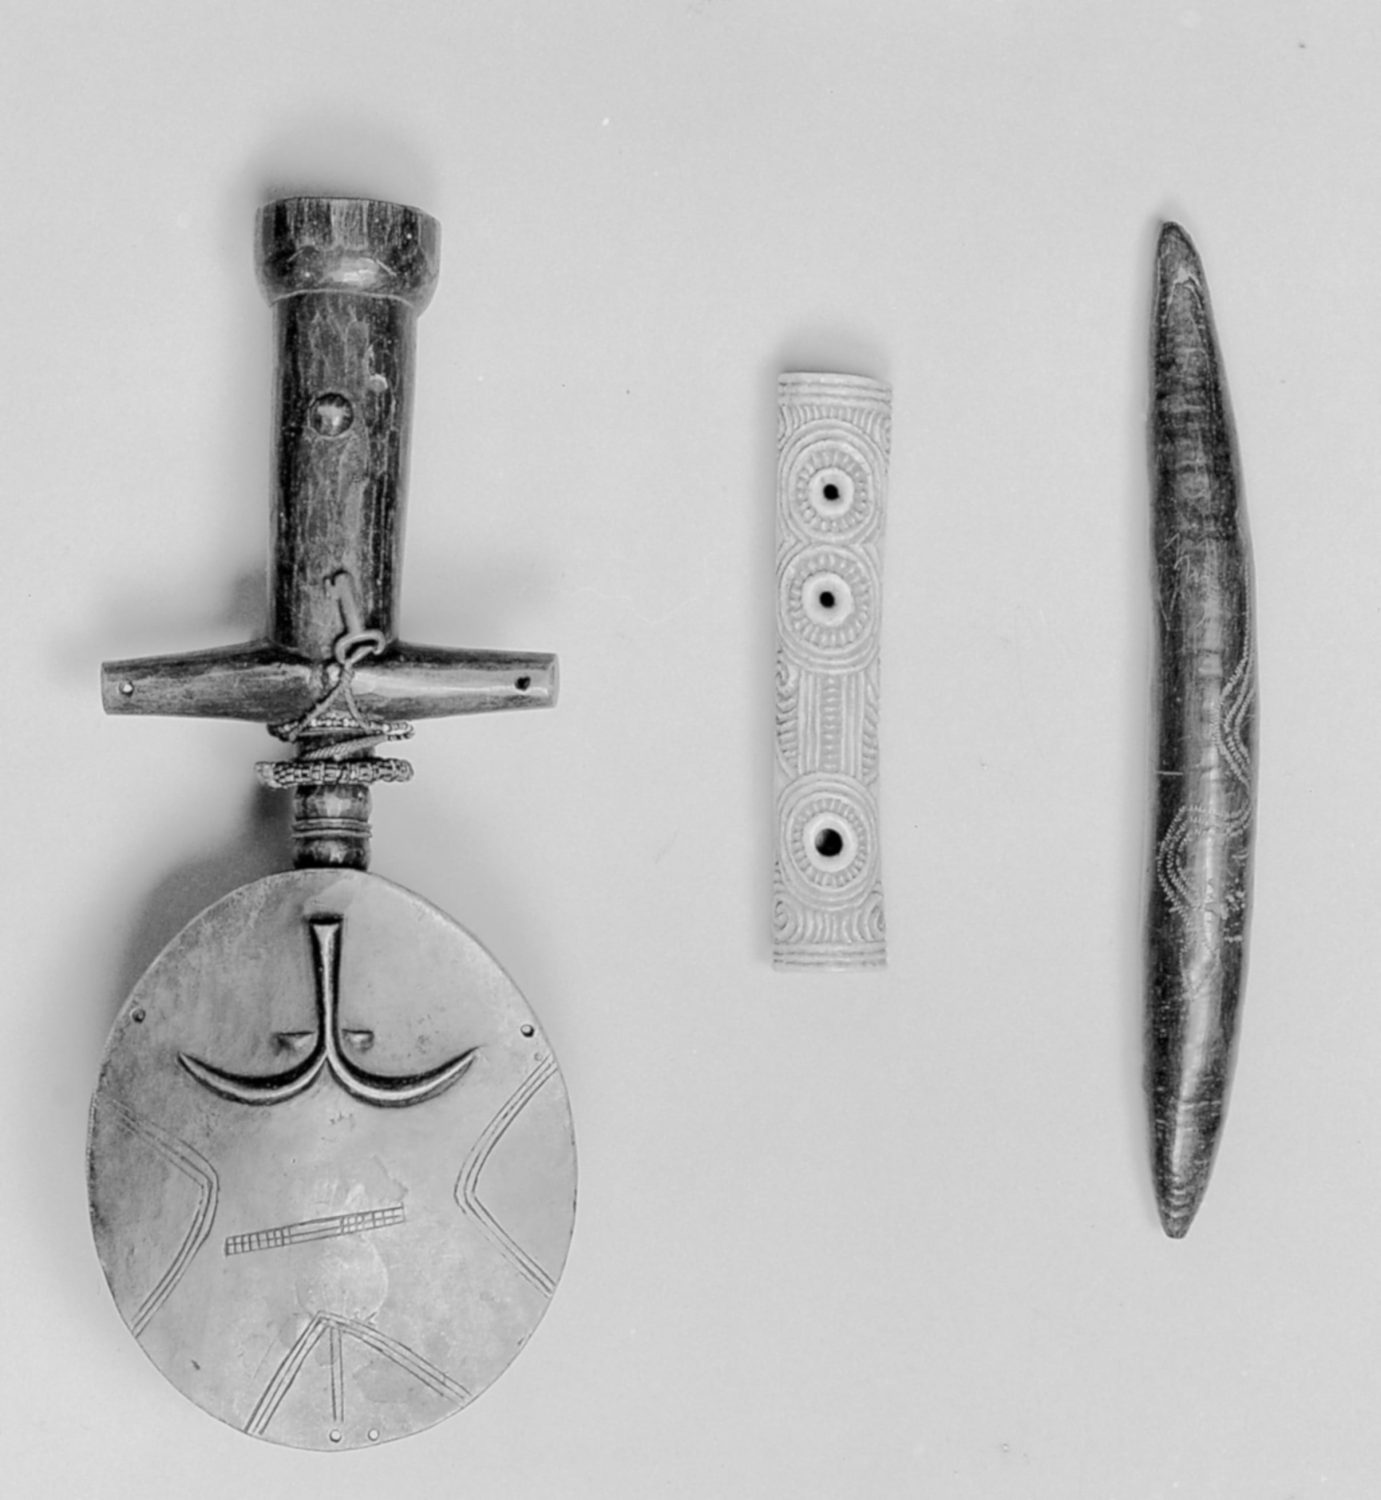 Amulets associated with childbirth and children